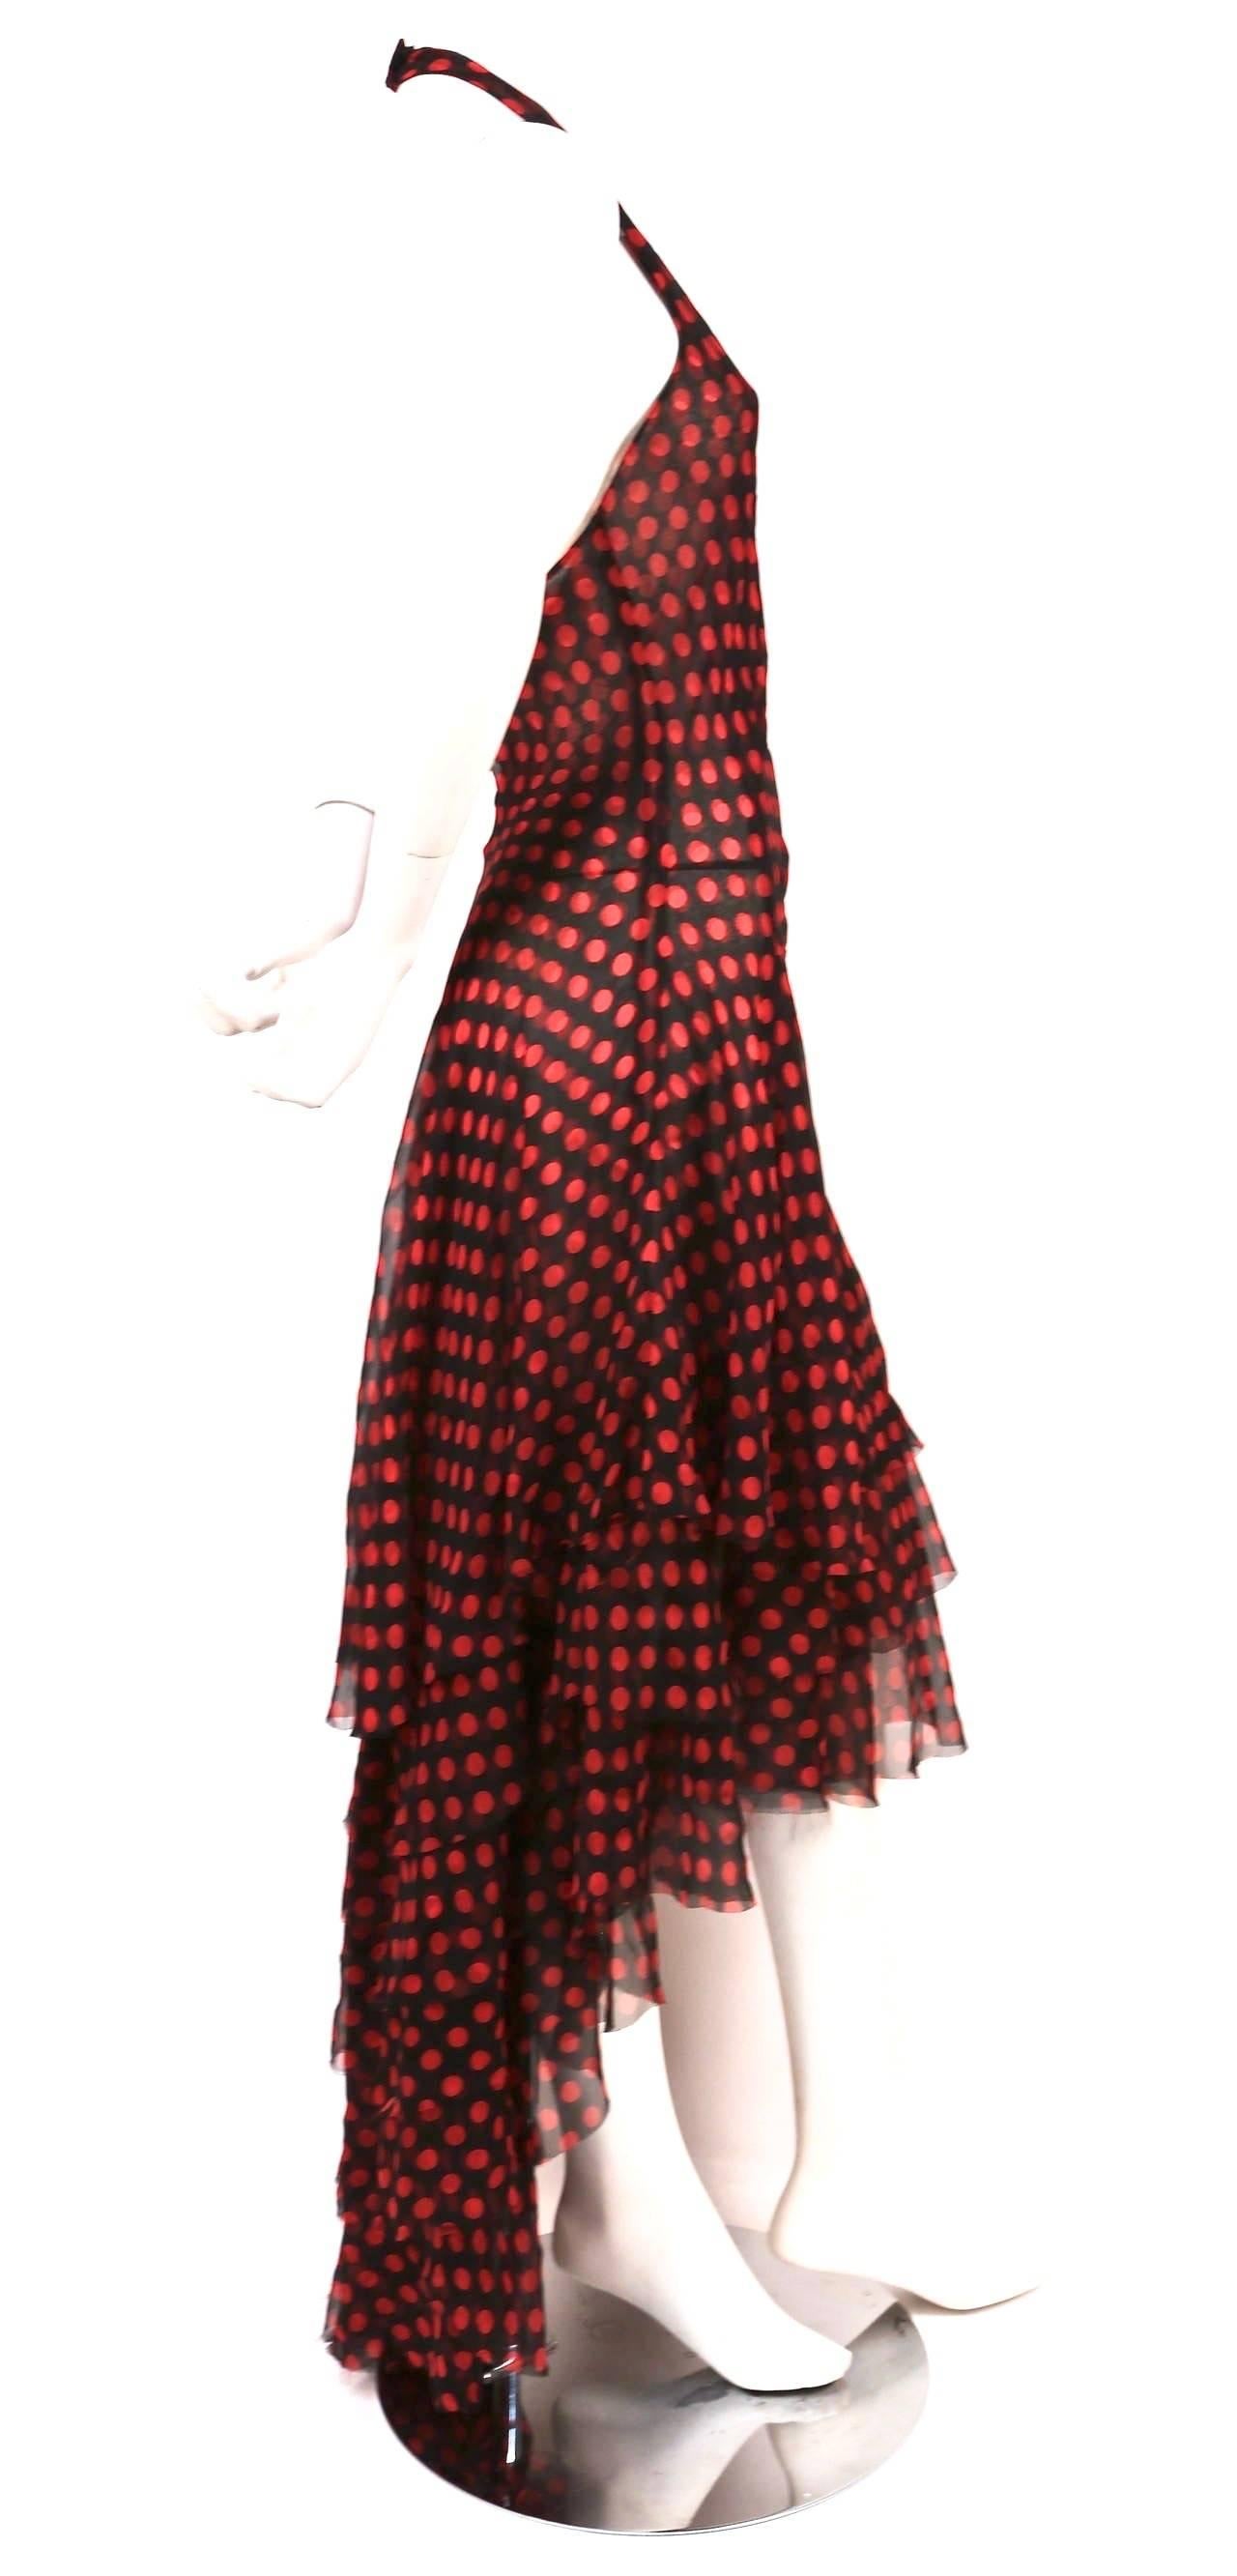 Very rare, black halter gown raw edged tiers, high-low hemline and red polka dots designed by Alexander McQueen dating to spring of 2003, exactly as seen on the runway. Dress best fits a us size 6-10. Measurements are difficult to take because this